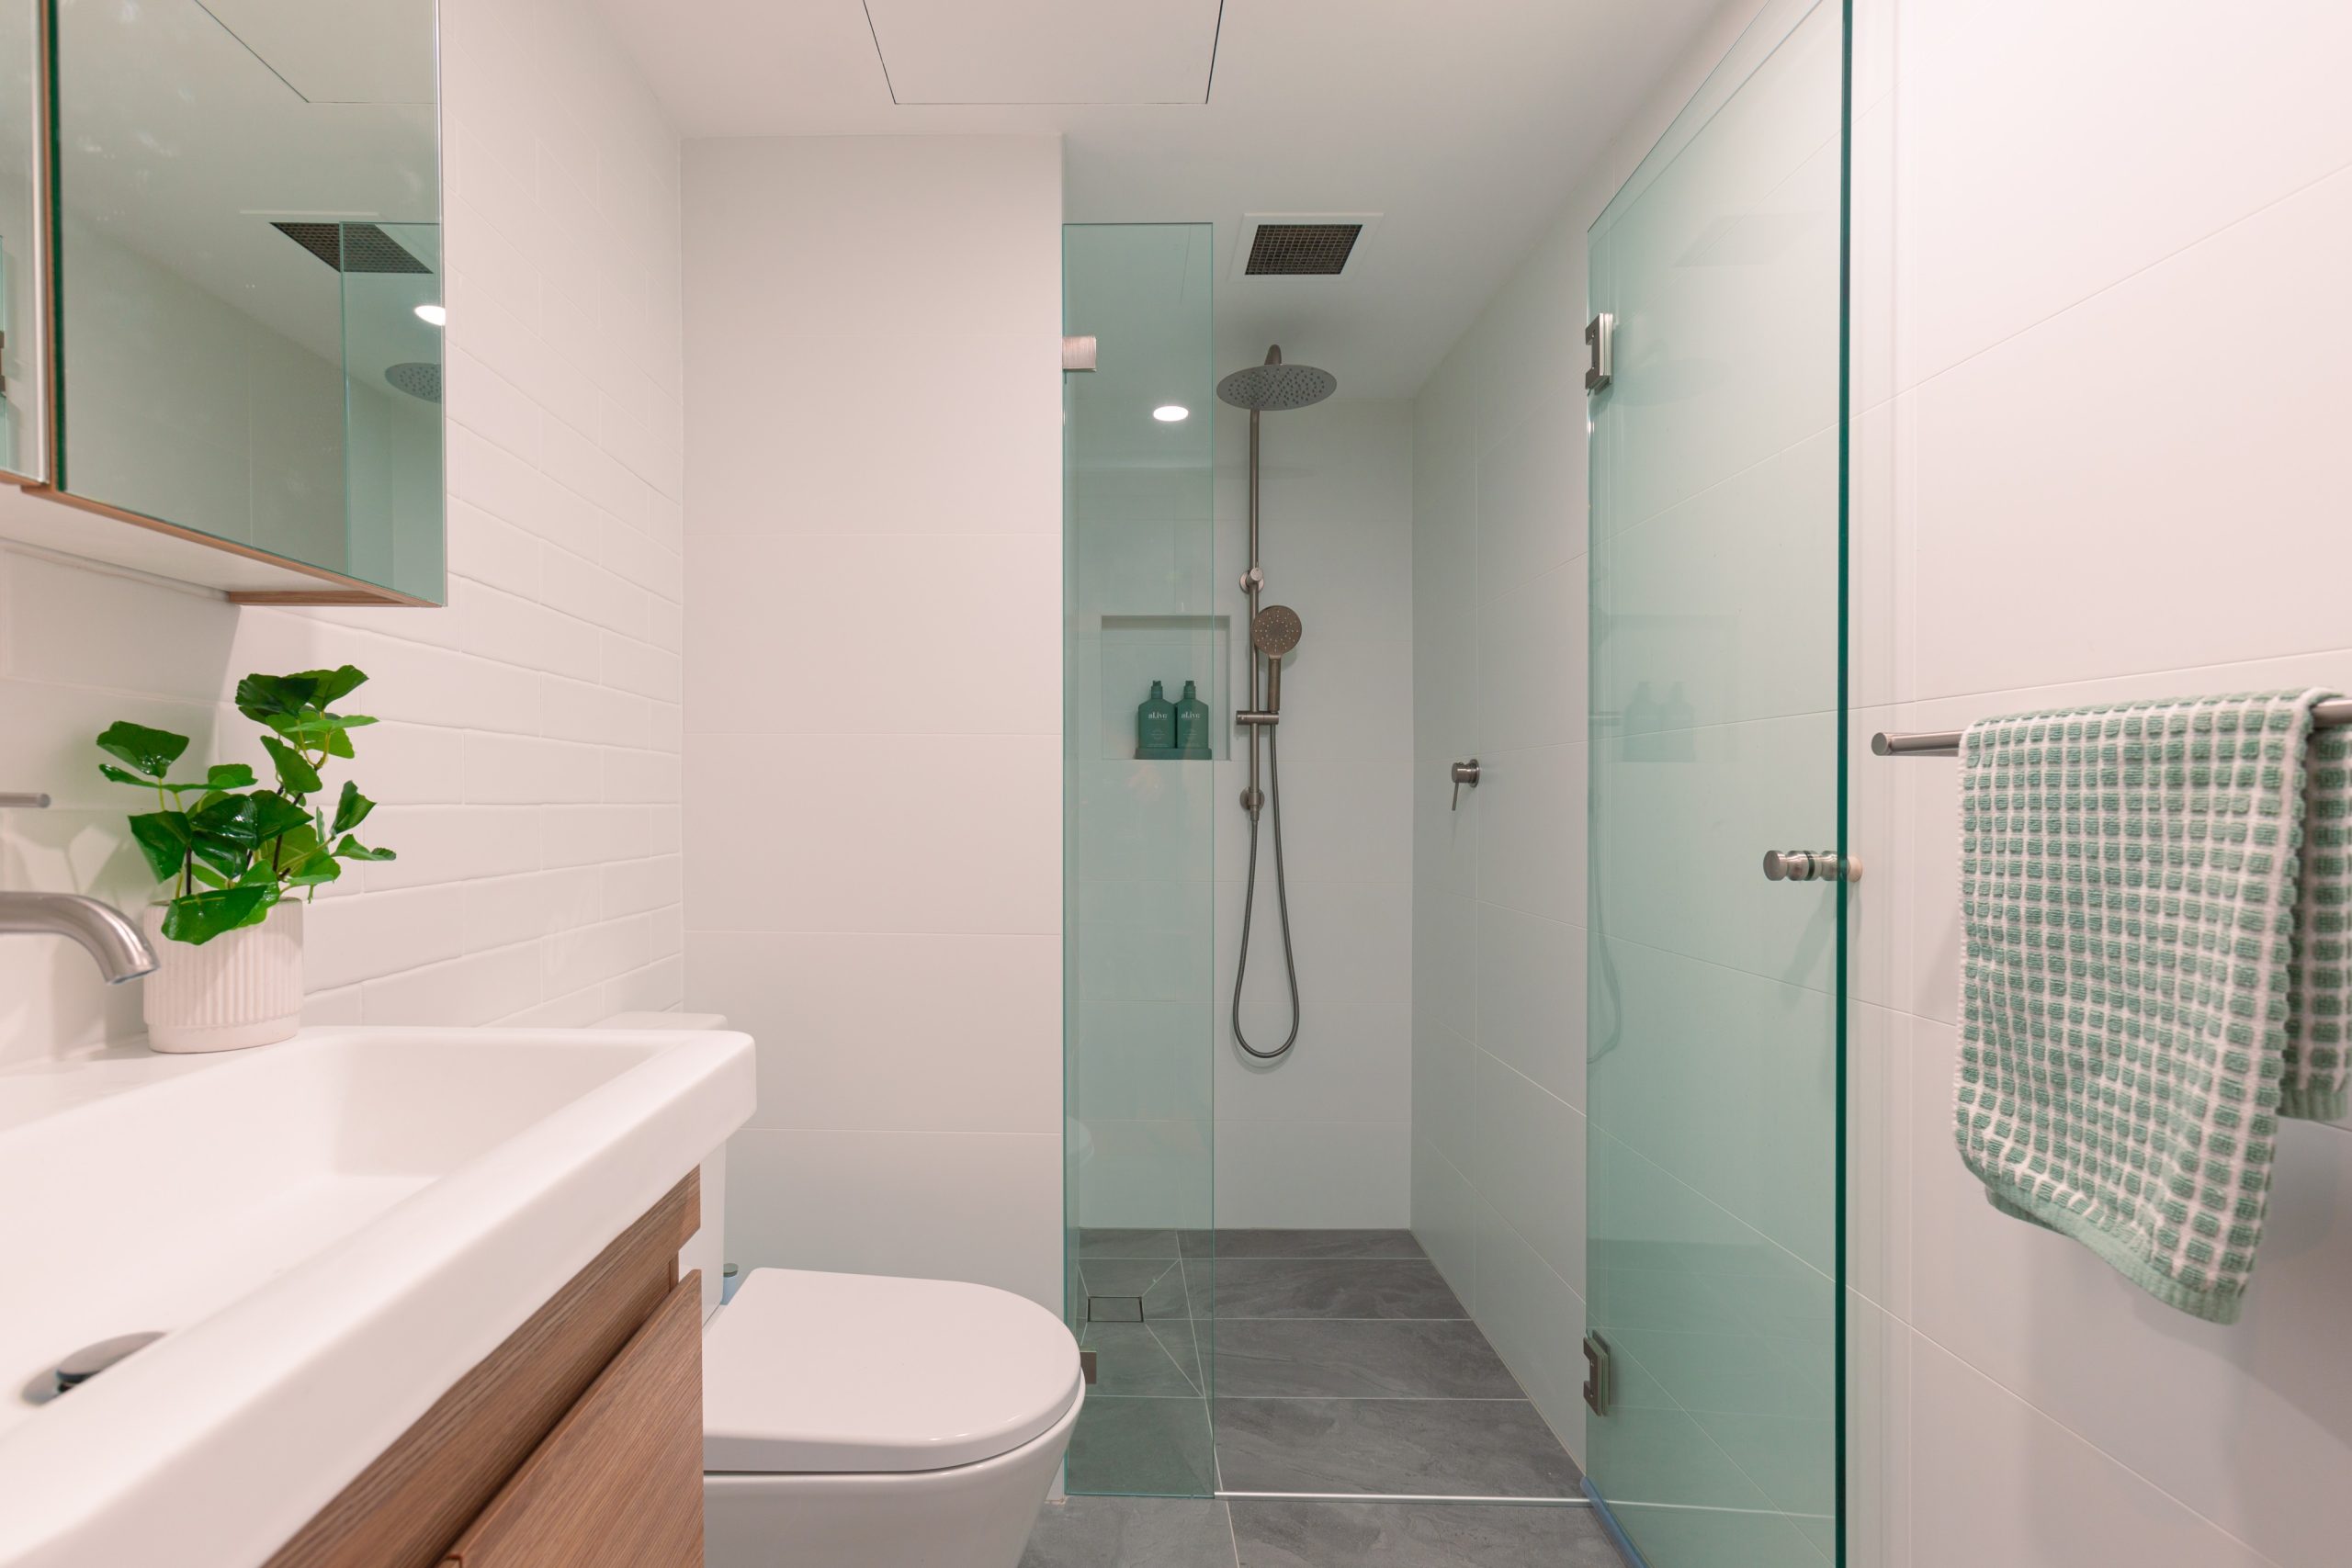 How to Use Flooring to Create a Cohesive Bathroom Design